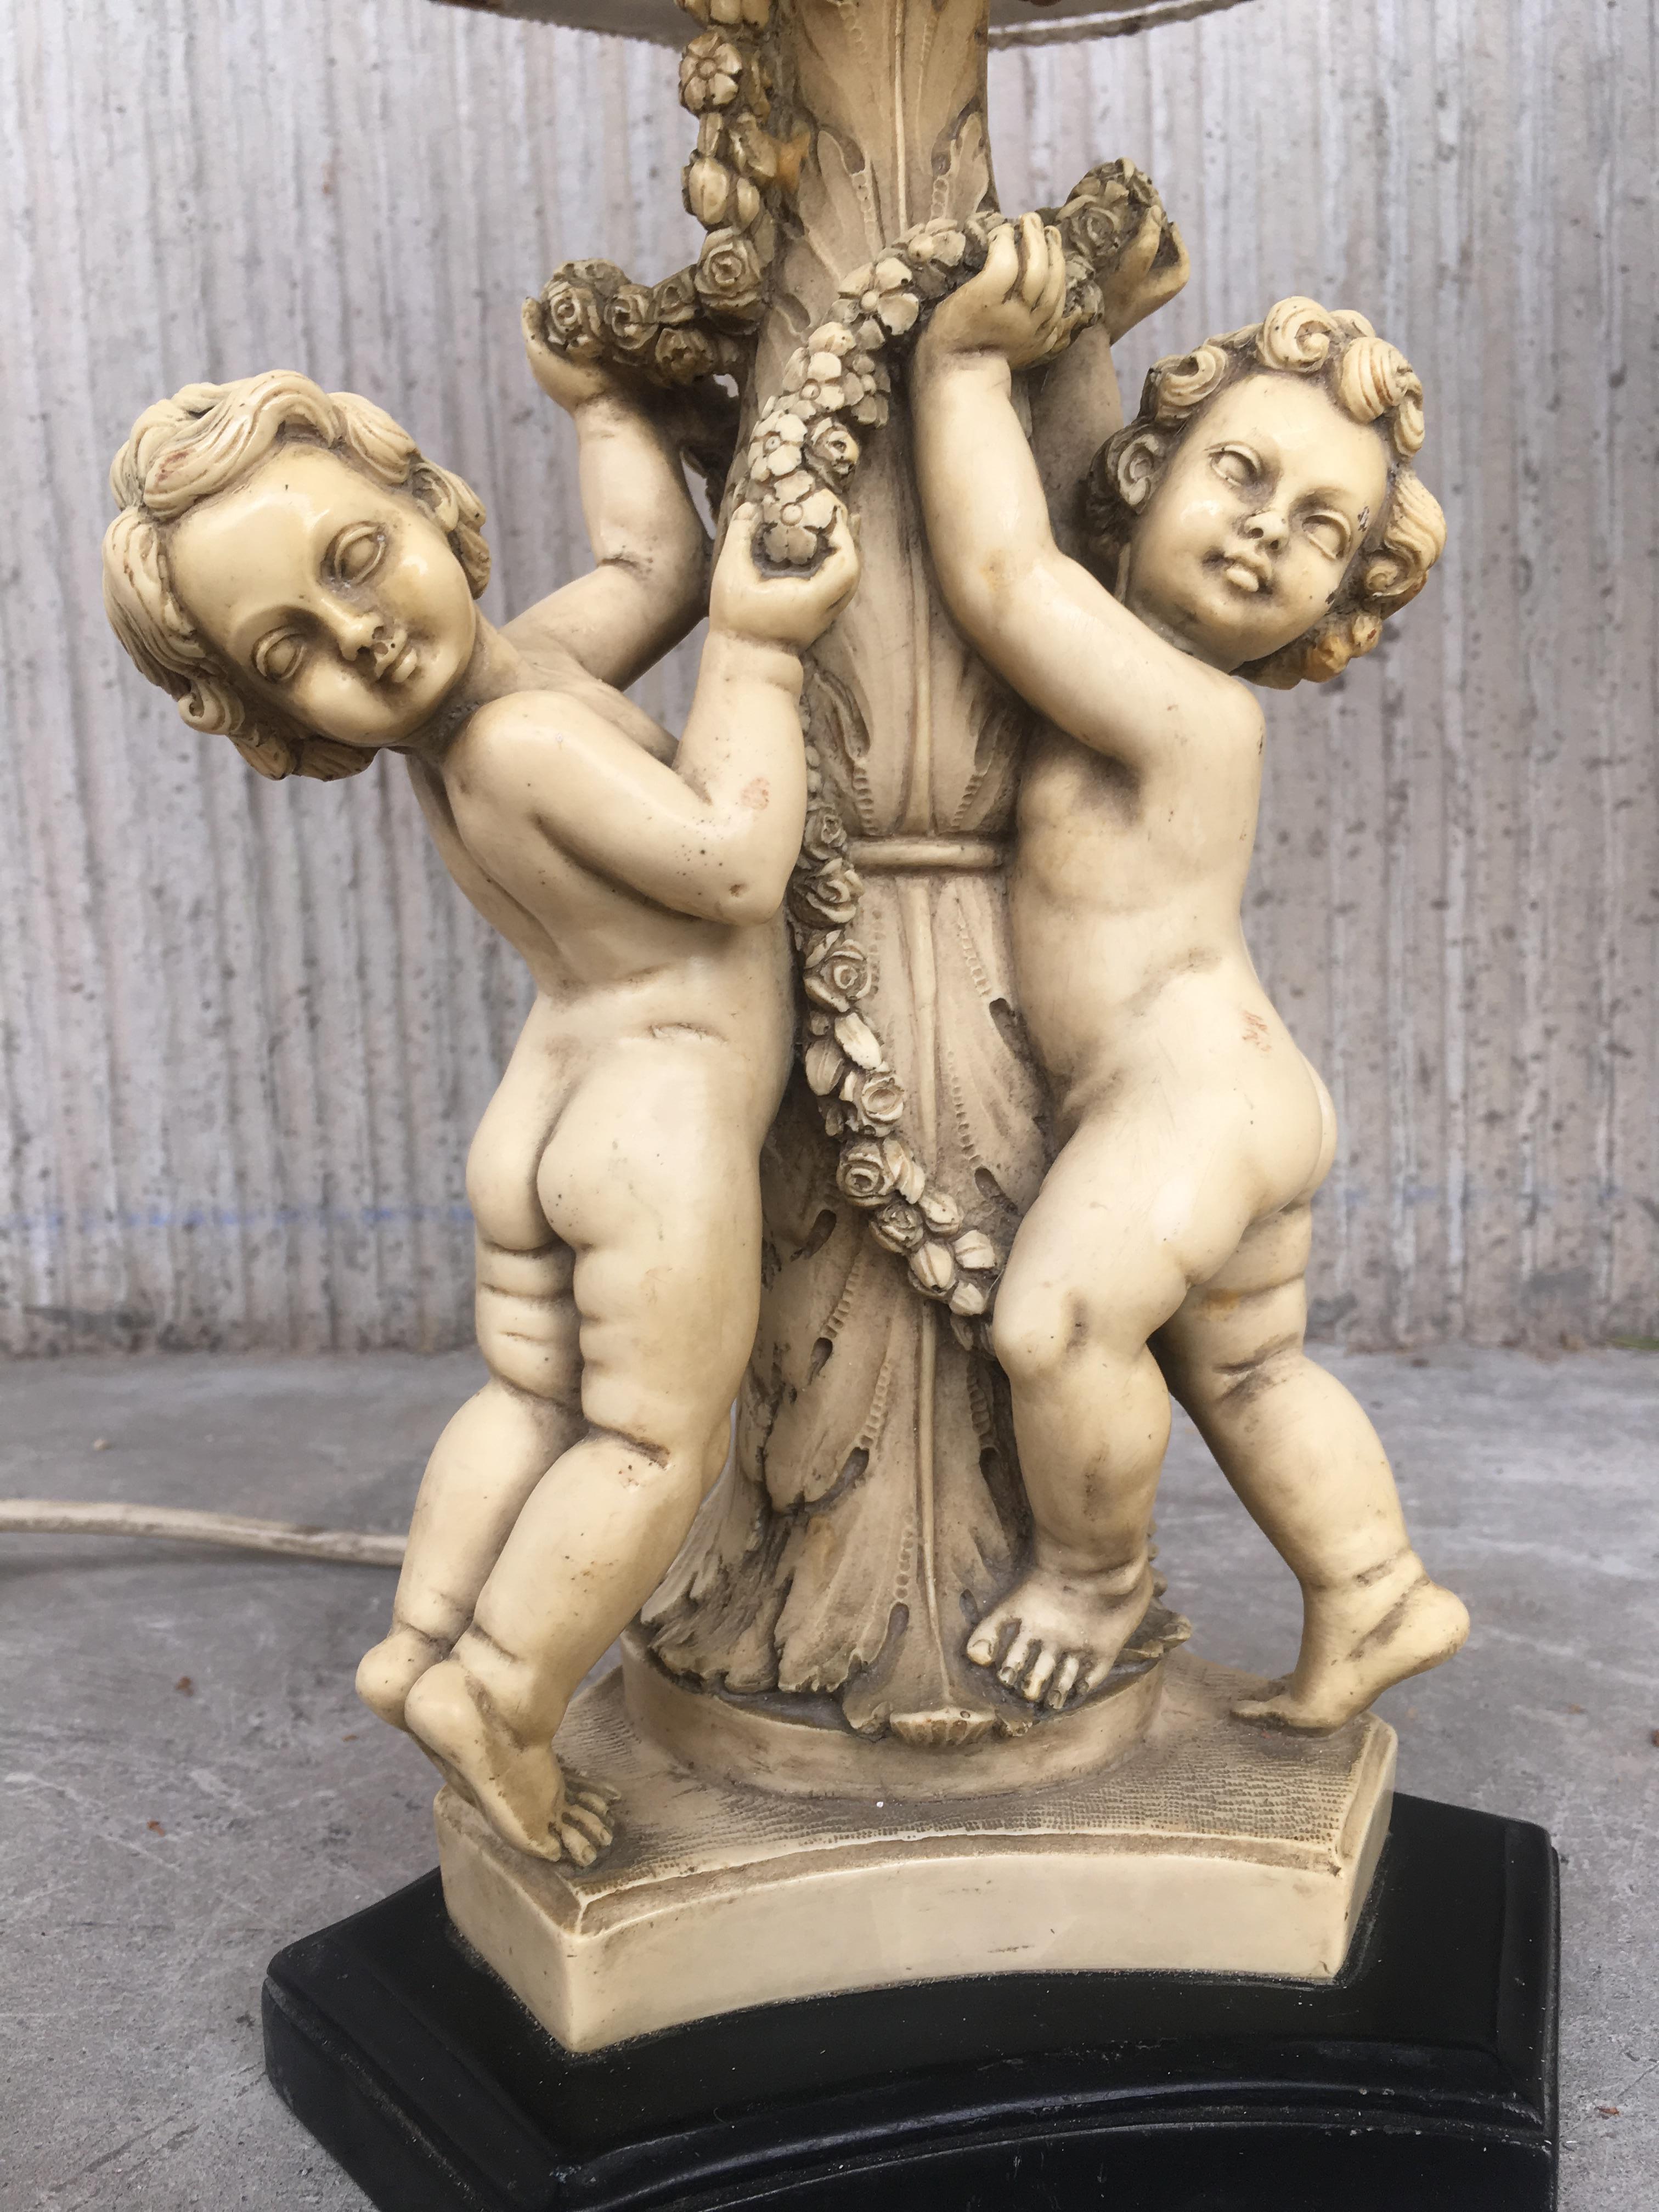 20th Century Pair of White Resin Cherub Lamps on Wooden Bases by G. Ruggeri In Good Condition For Sale In Miami, FL